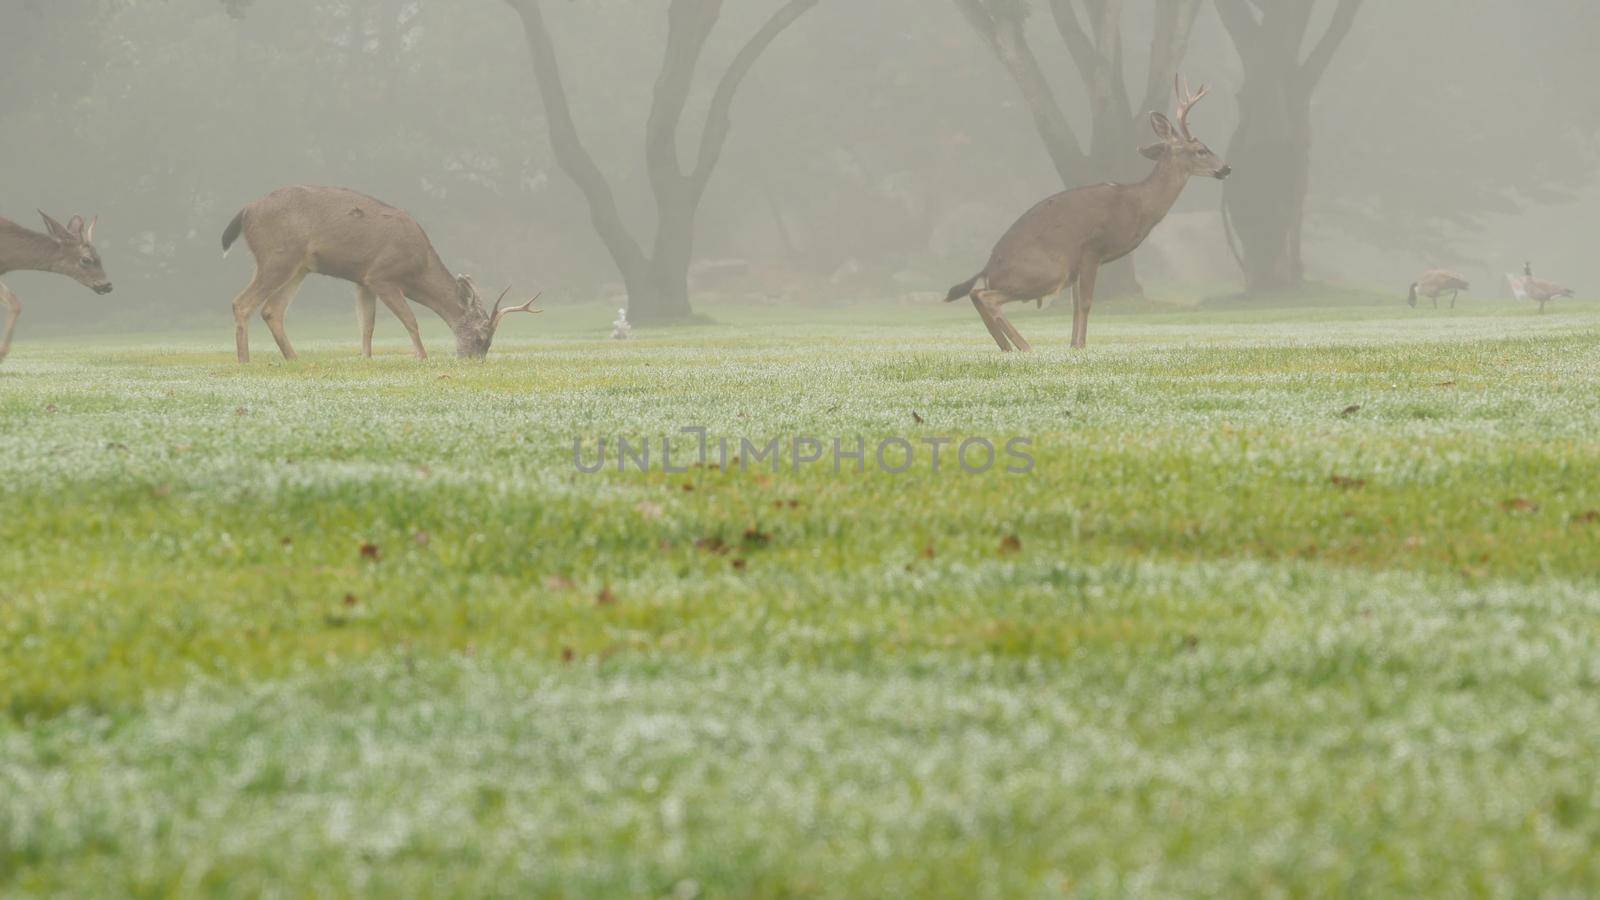 Wild deer defecating or peeing, foggy forest. Animal pooping or pissing on grass by DogoraSun